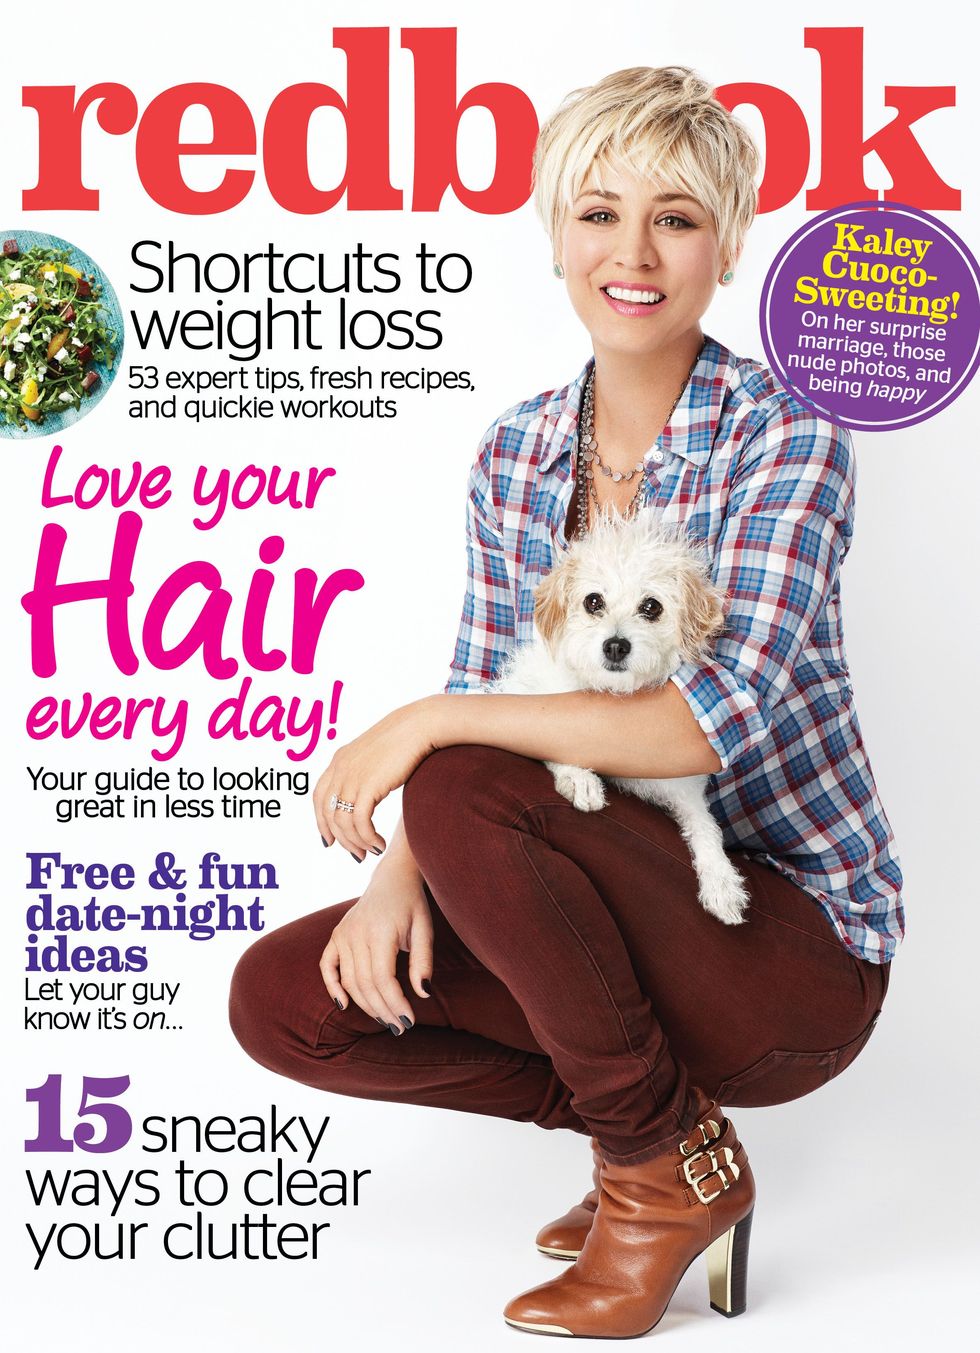 Kaley Cuoco-Sweeting on the cover of Redbook magazine